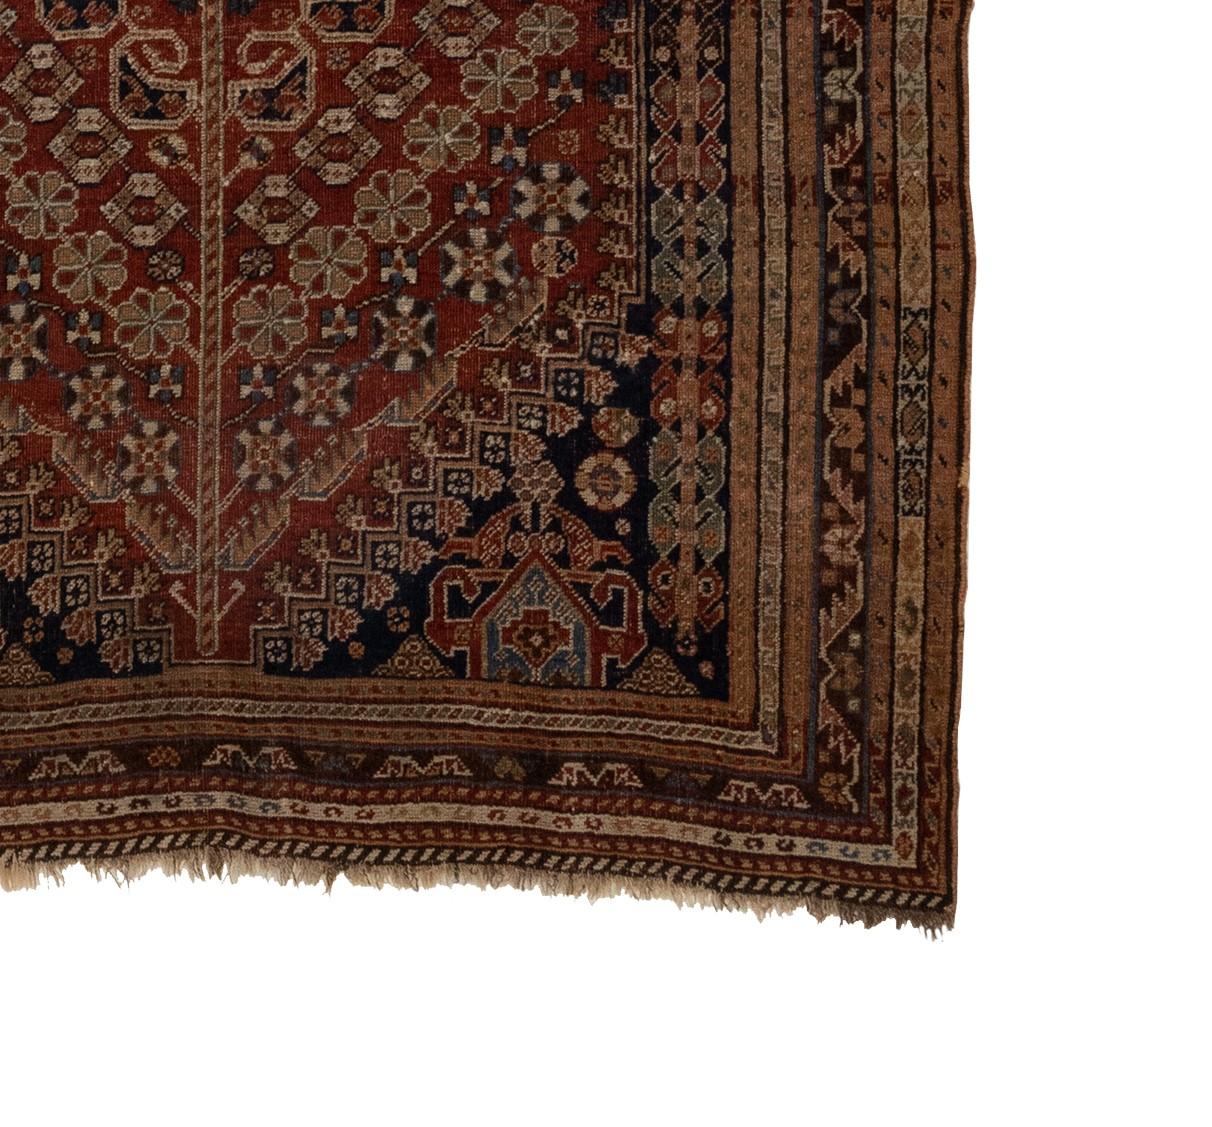 The Qashqai rugs are a testament to the rich cultural heritage and unifying spirit of a proud tribal confederation. These pastoral nomads, who trace their lineage to the Turkmen and Ersari tribes, traverse the vast expanse of the Isfahan province,